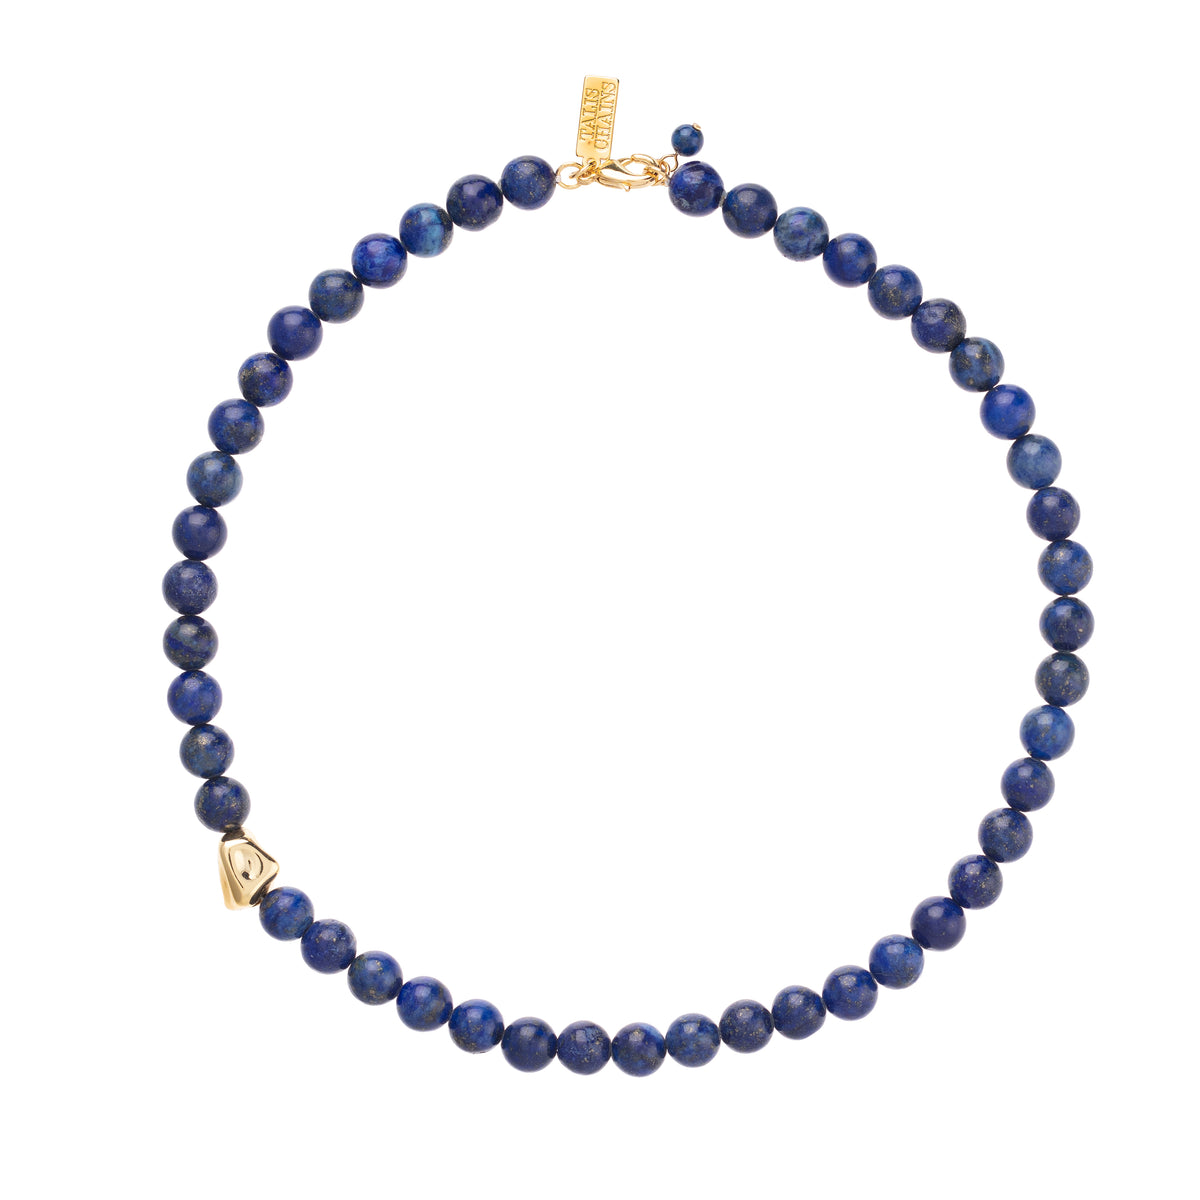 Lapis beaded necklace with gold bead detail and lobster clasp fastening